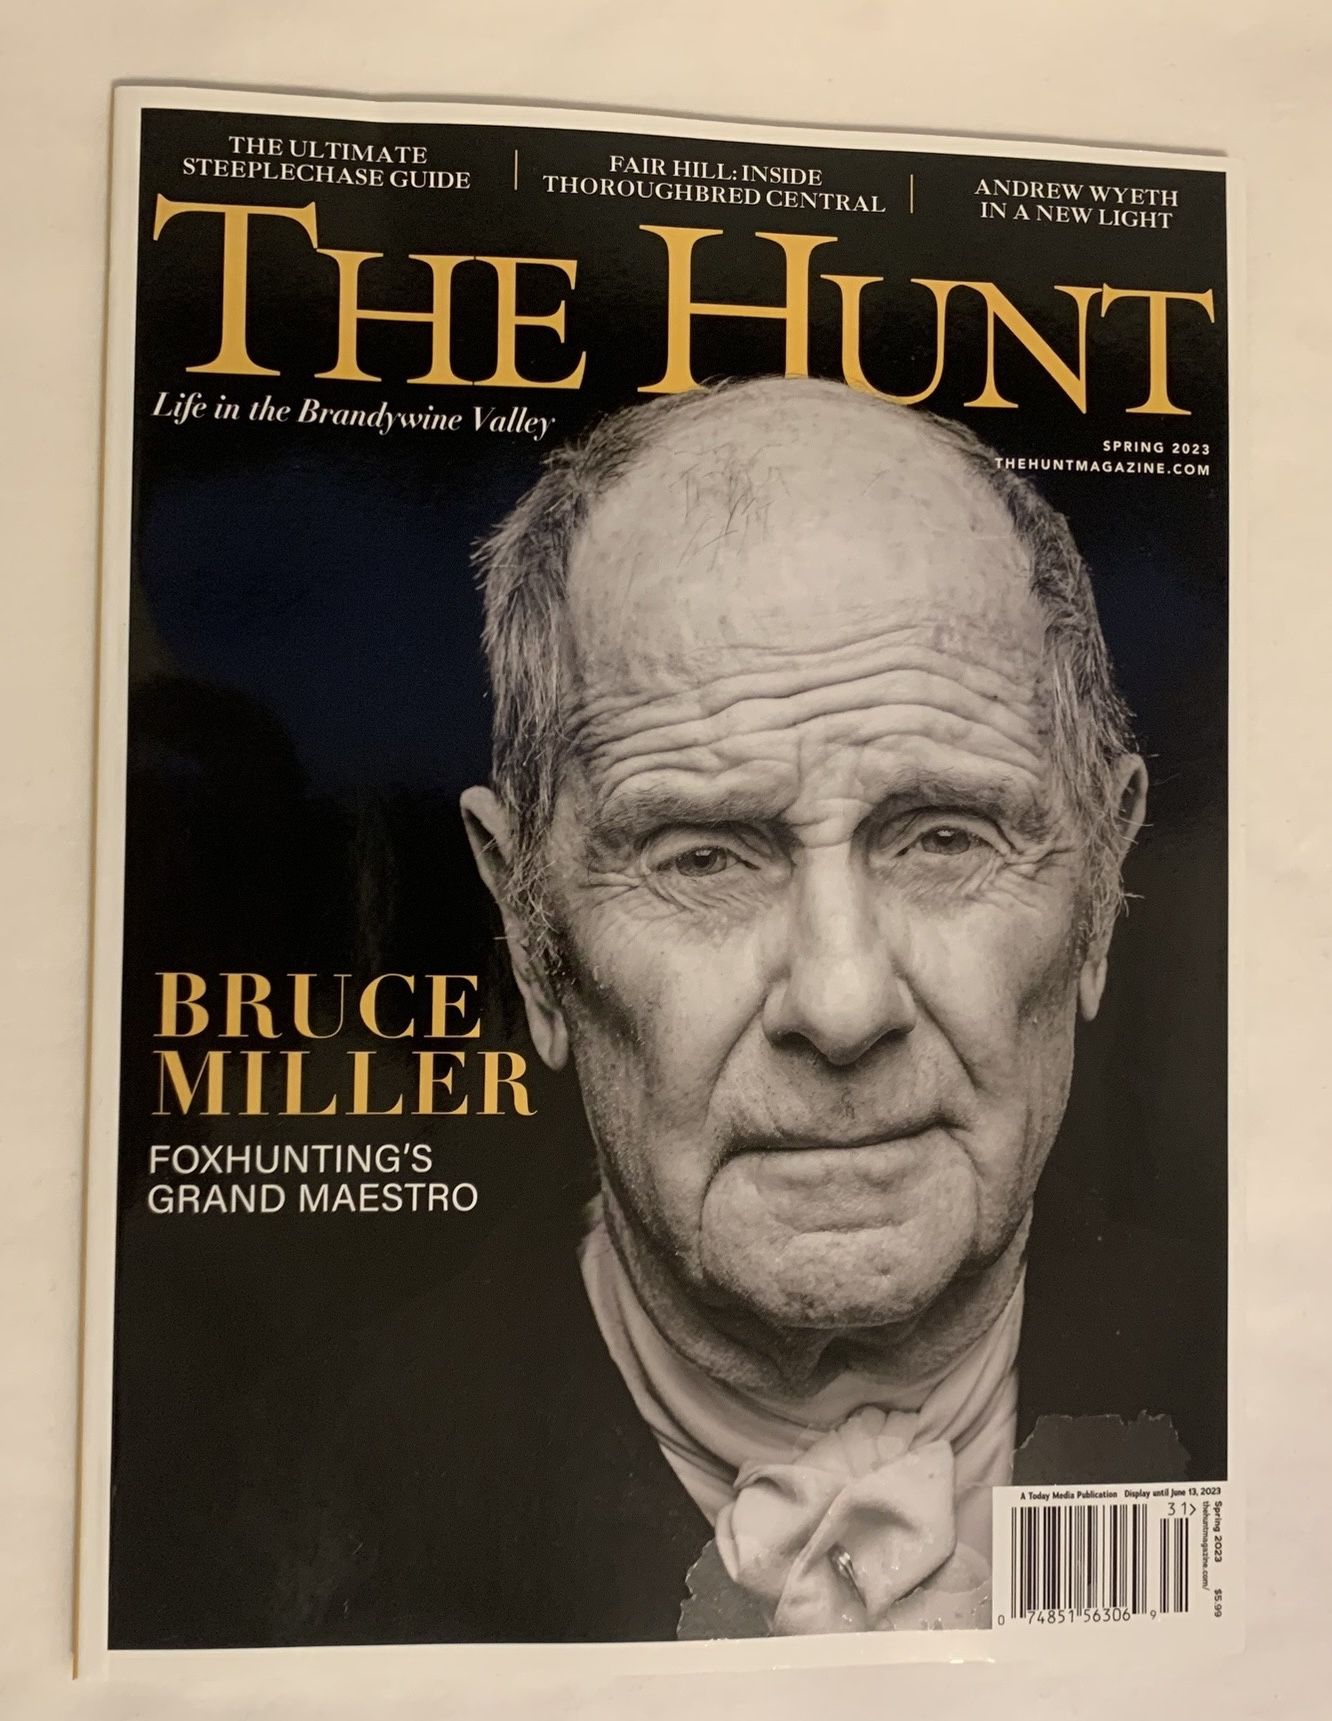 The Hunt Bruce Miller “Foxhunting’s Grand Maestro” Issue Spring 2023 Magazine 